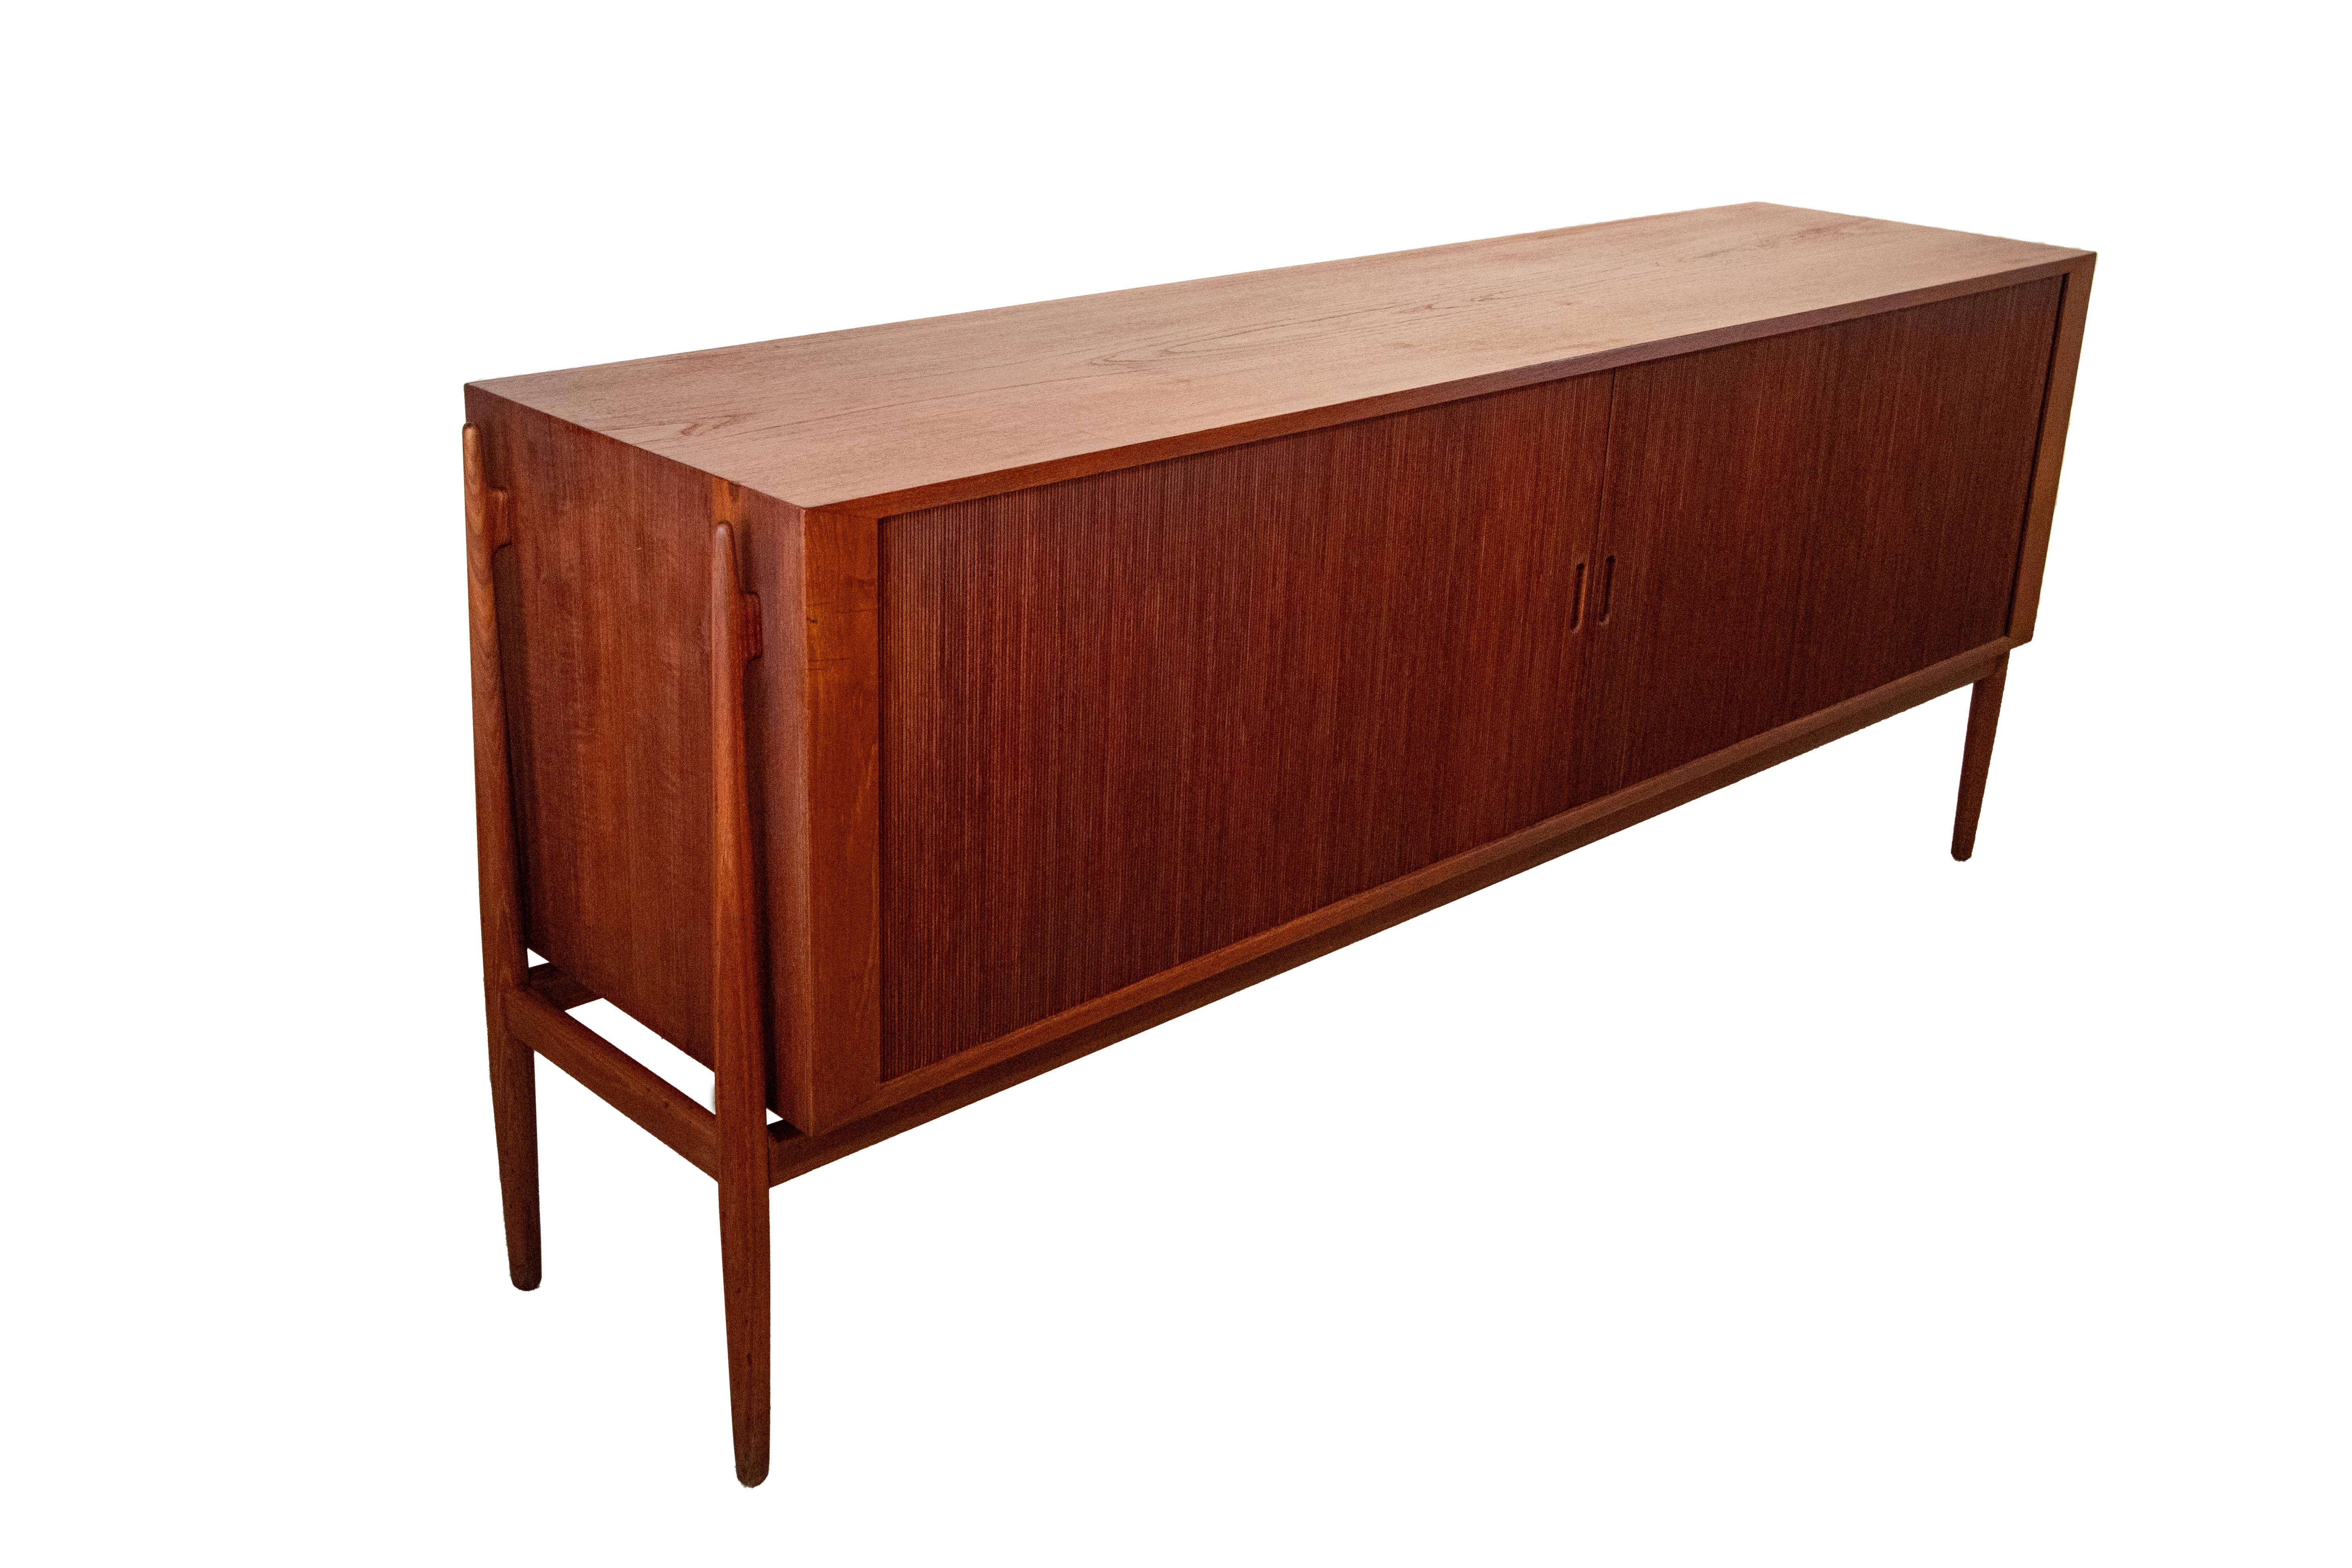 A stunning sideboard from cabinetmaker Niels Vodder imported from Denmark by Illums Bolighus. This is a highly south after cabinet and rarely comes to market. This example from a single family owner on Long Island New York. The couple purchased the